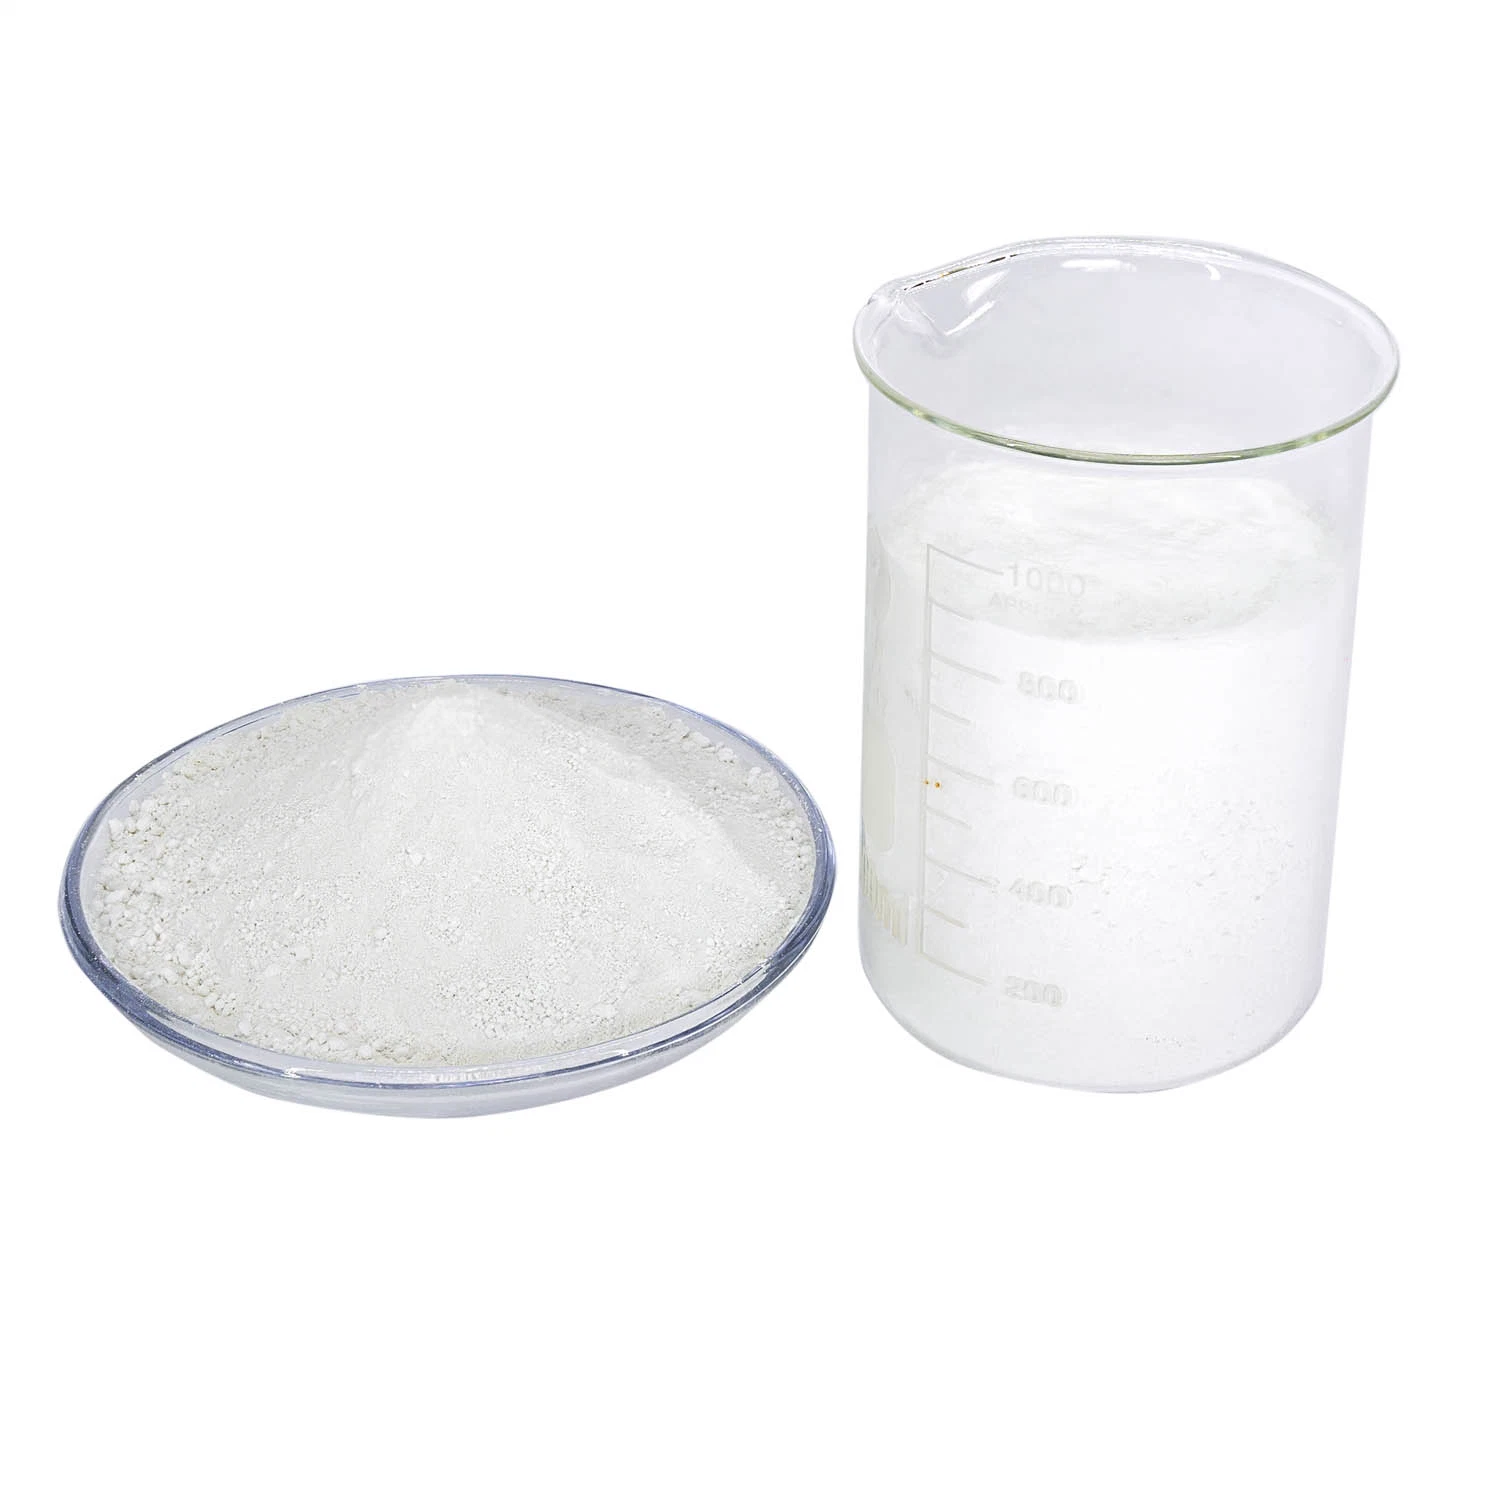 Industrial Grade Titanium Dioxide Linhaw Lhr-986 Widely Used in Paint, Plastic, Ink, Paper Making, Coatings, Rubber